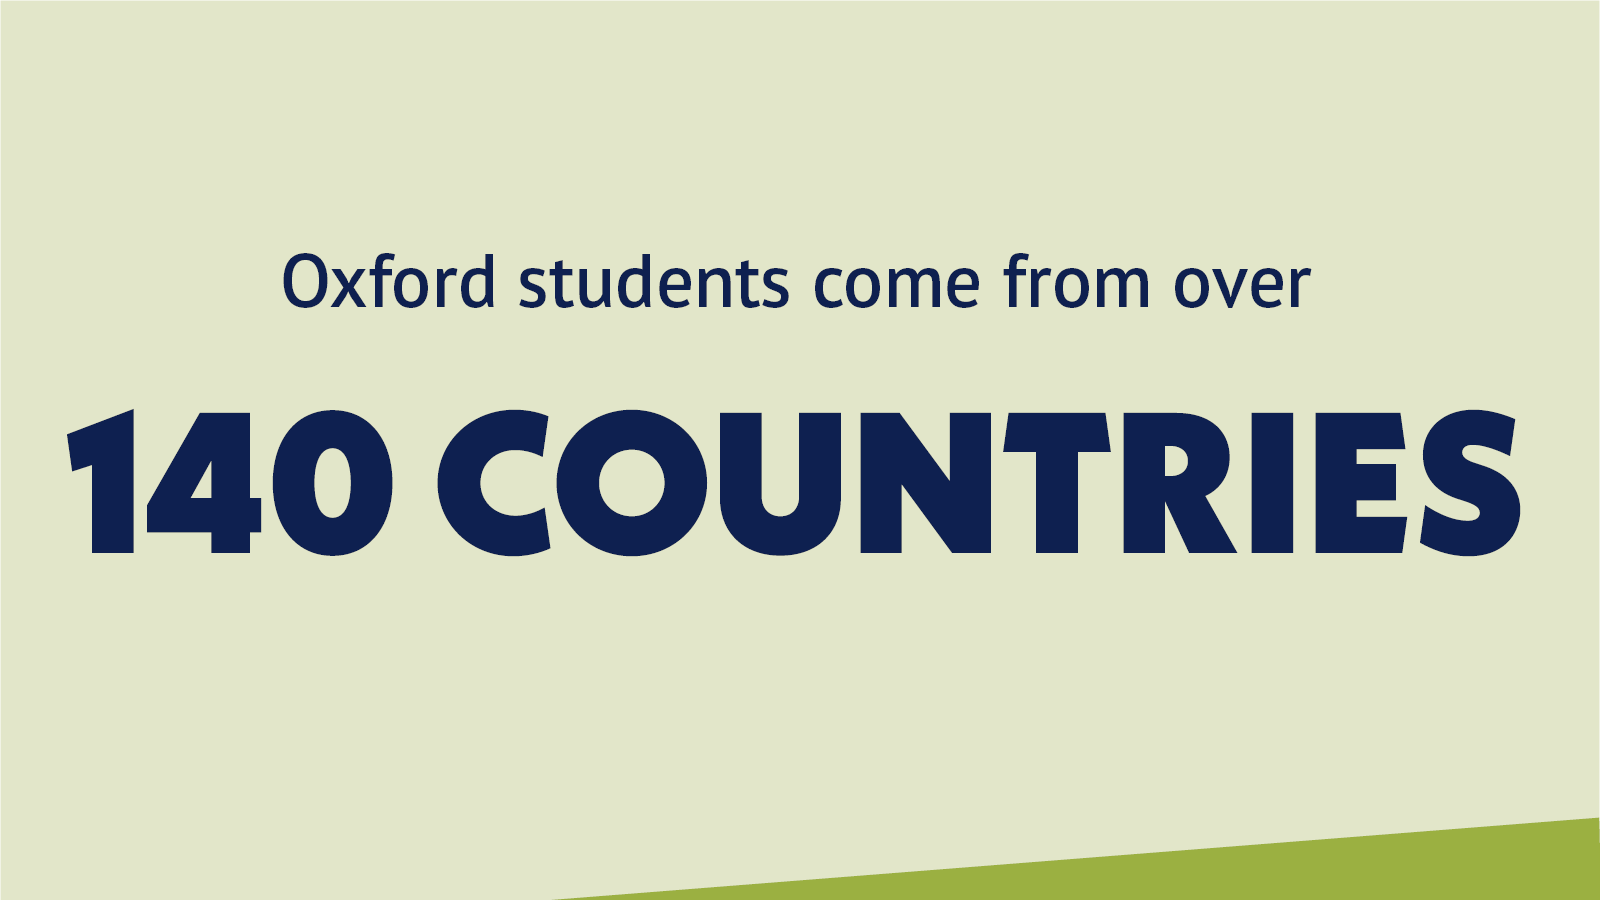 Oxford students come from over 140 countries